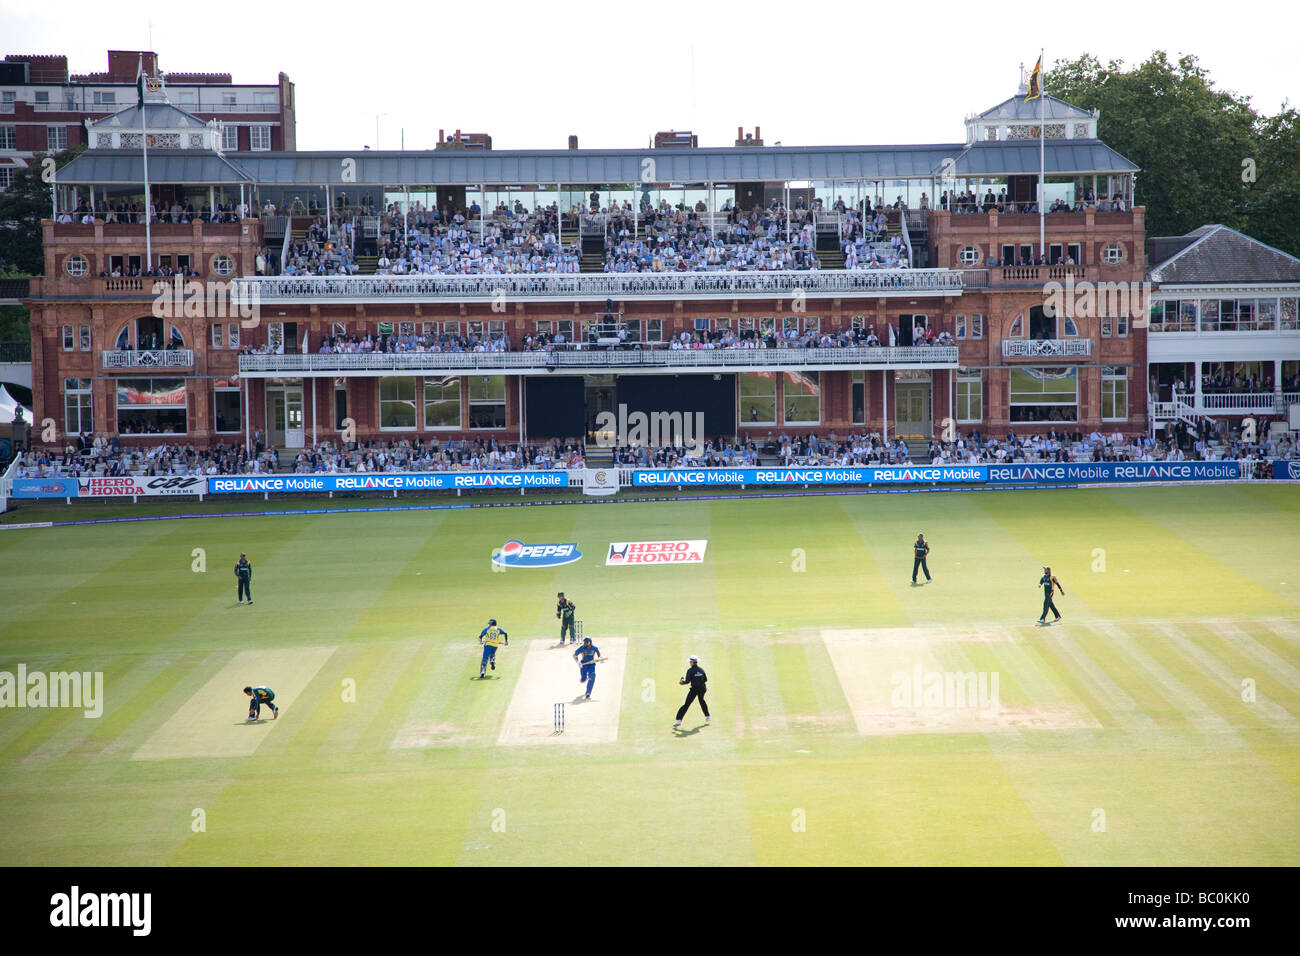 A general view of the ground during the ICC World Twenty20 Final between Pakistan and Sri Lanka at Lord's. Stock Photo